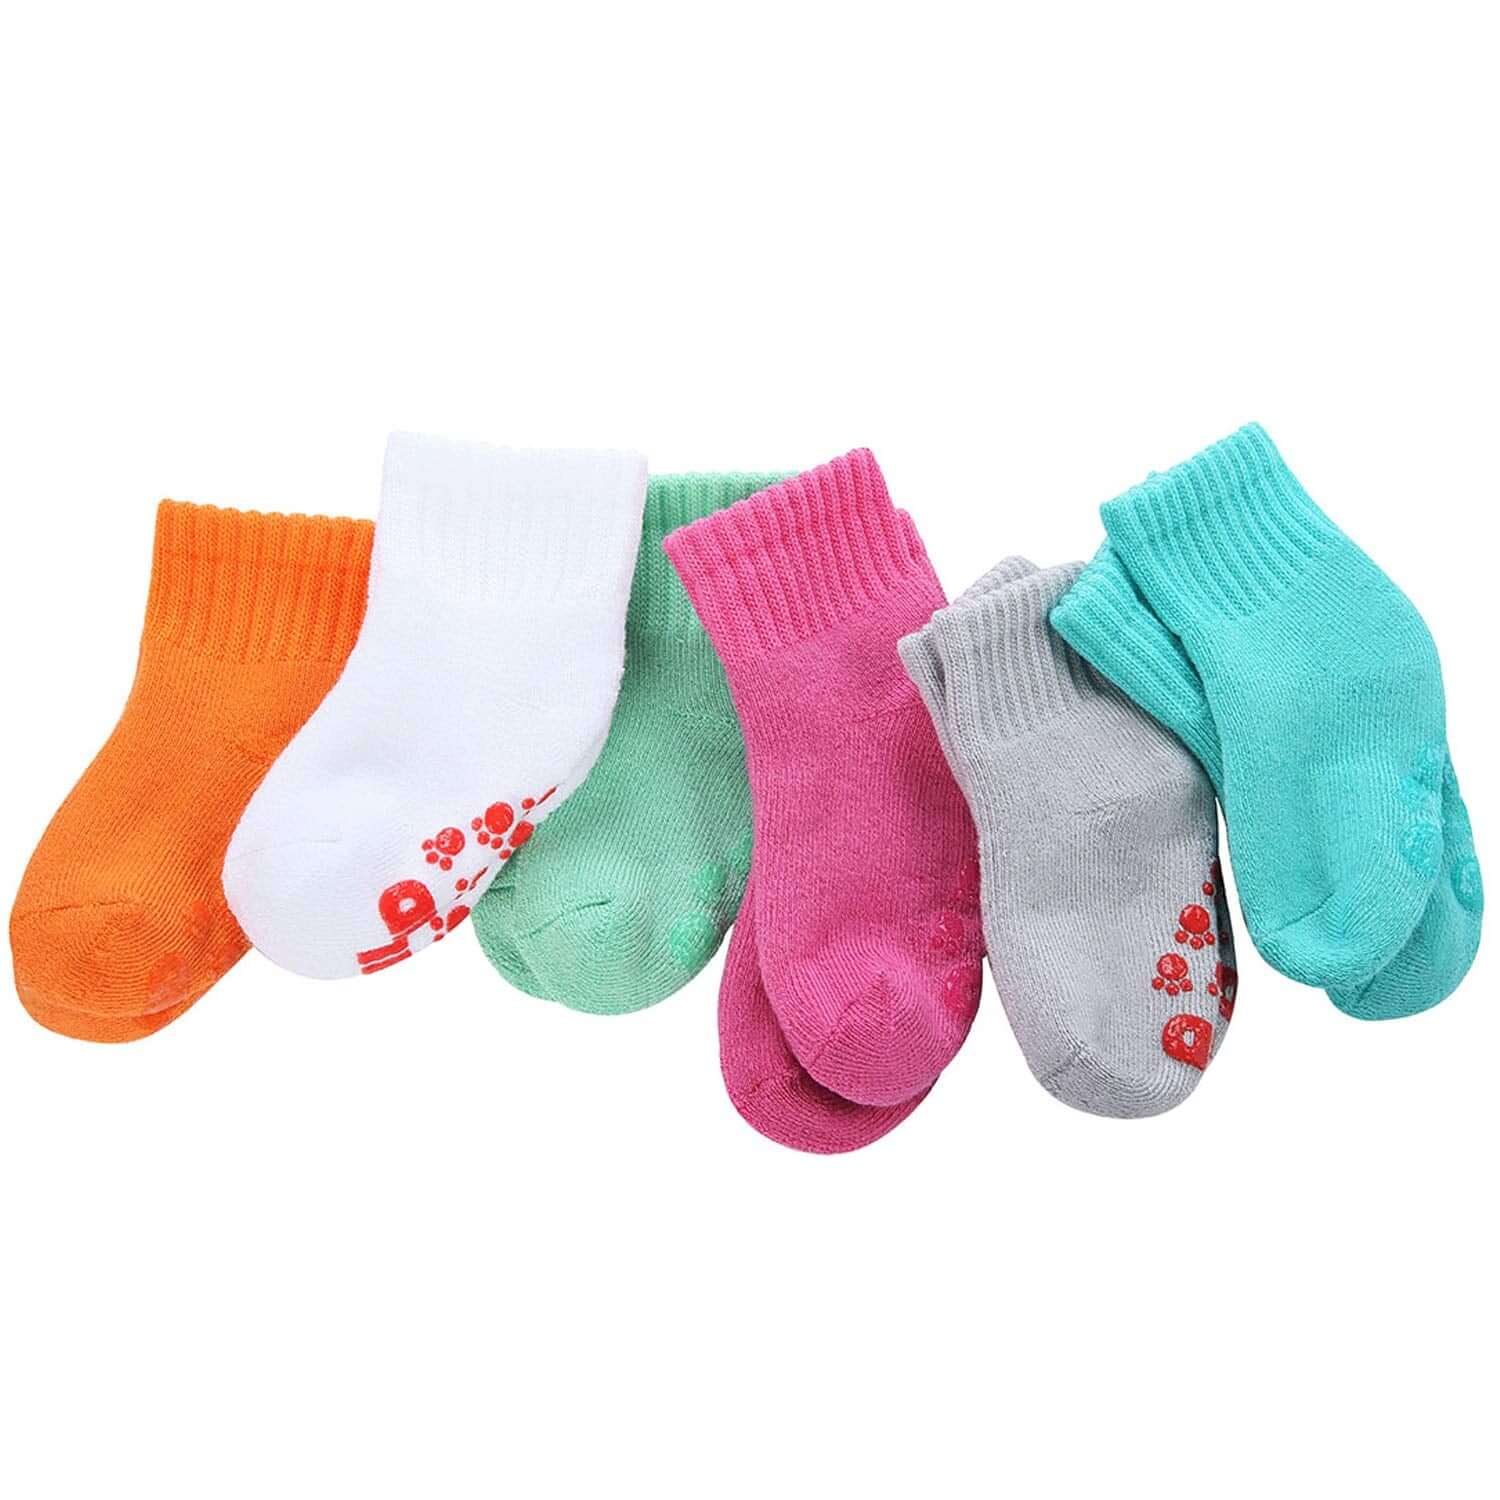 Comfort-Fresh 6pack 6-18 Months Baby Bamboo Colorful Socks - md-diab